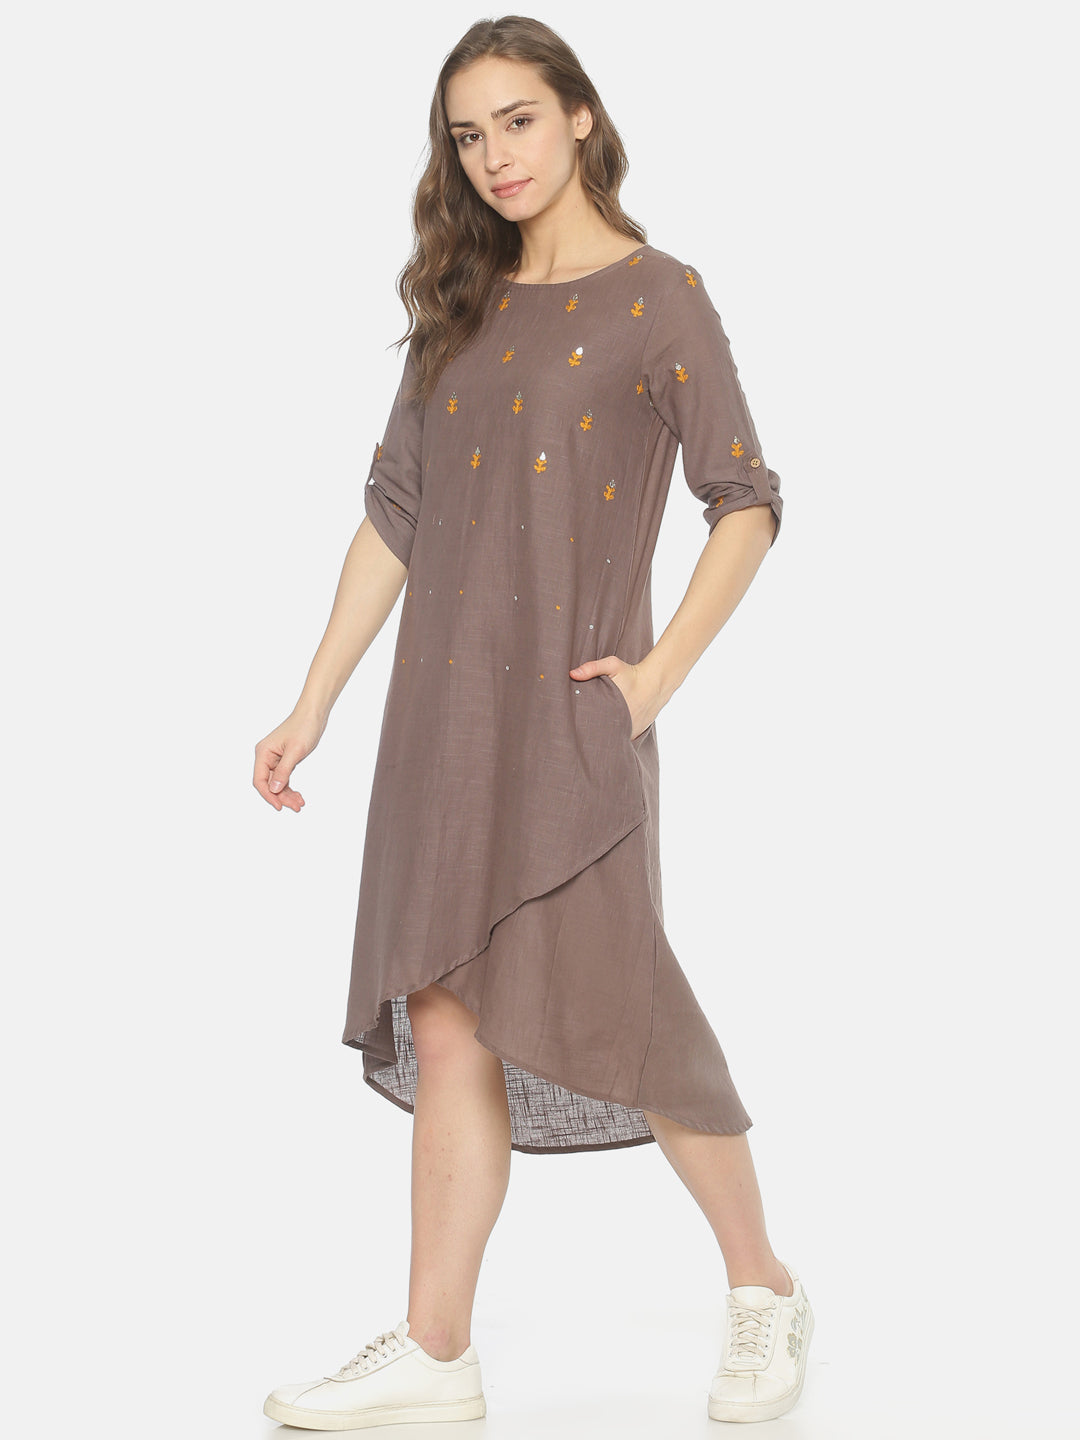 Grey Dress With Gota Embroidery | Untung